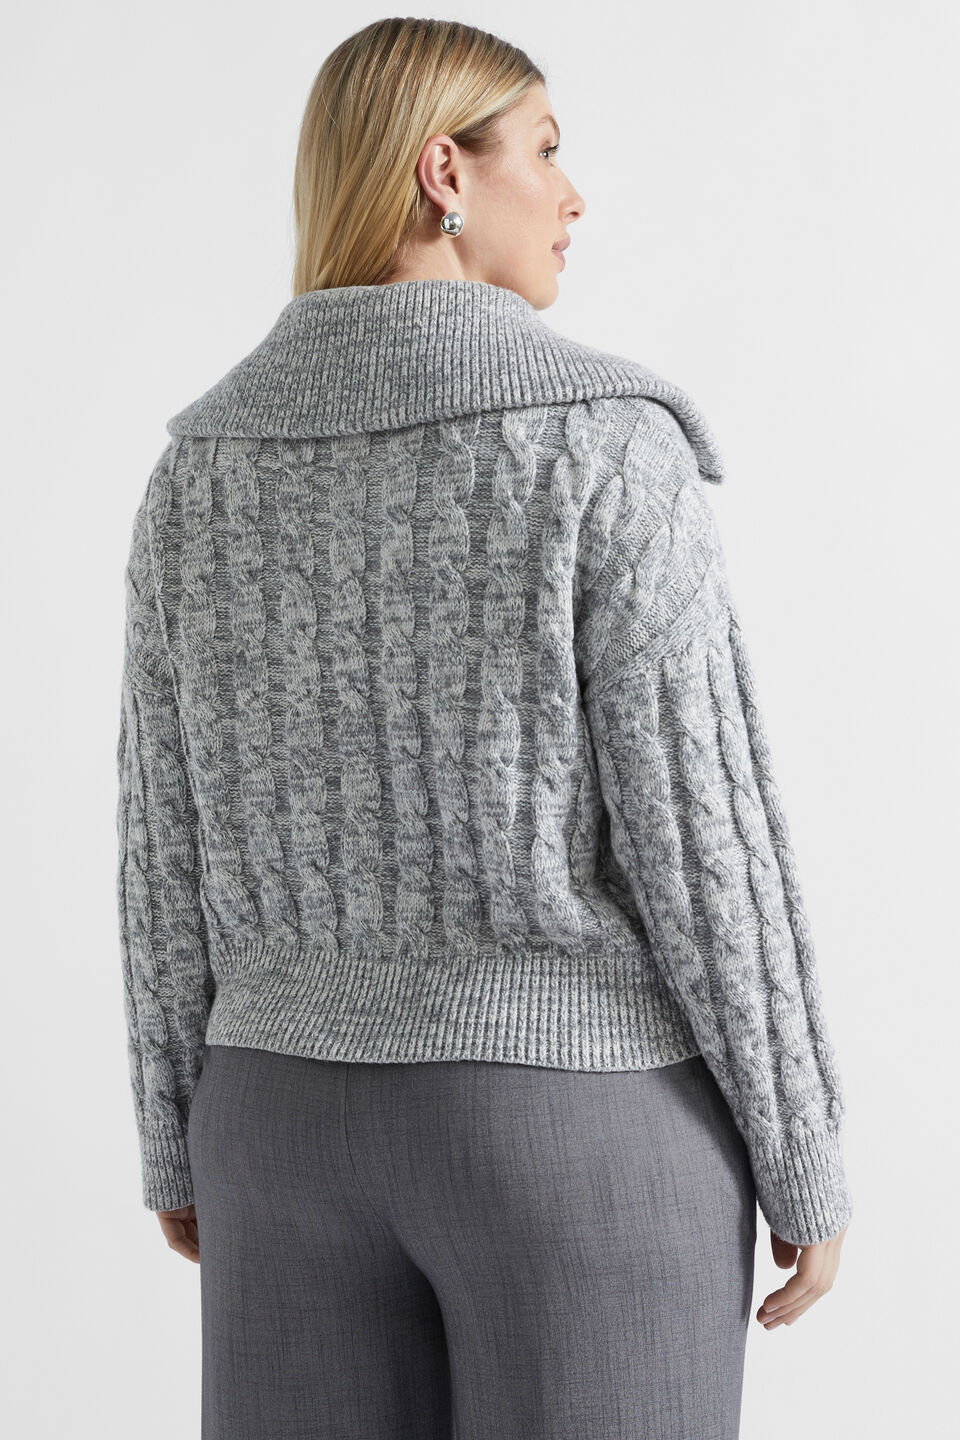 Cotton Blend Twist Cable Knit  Wolf Marle